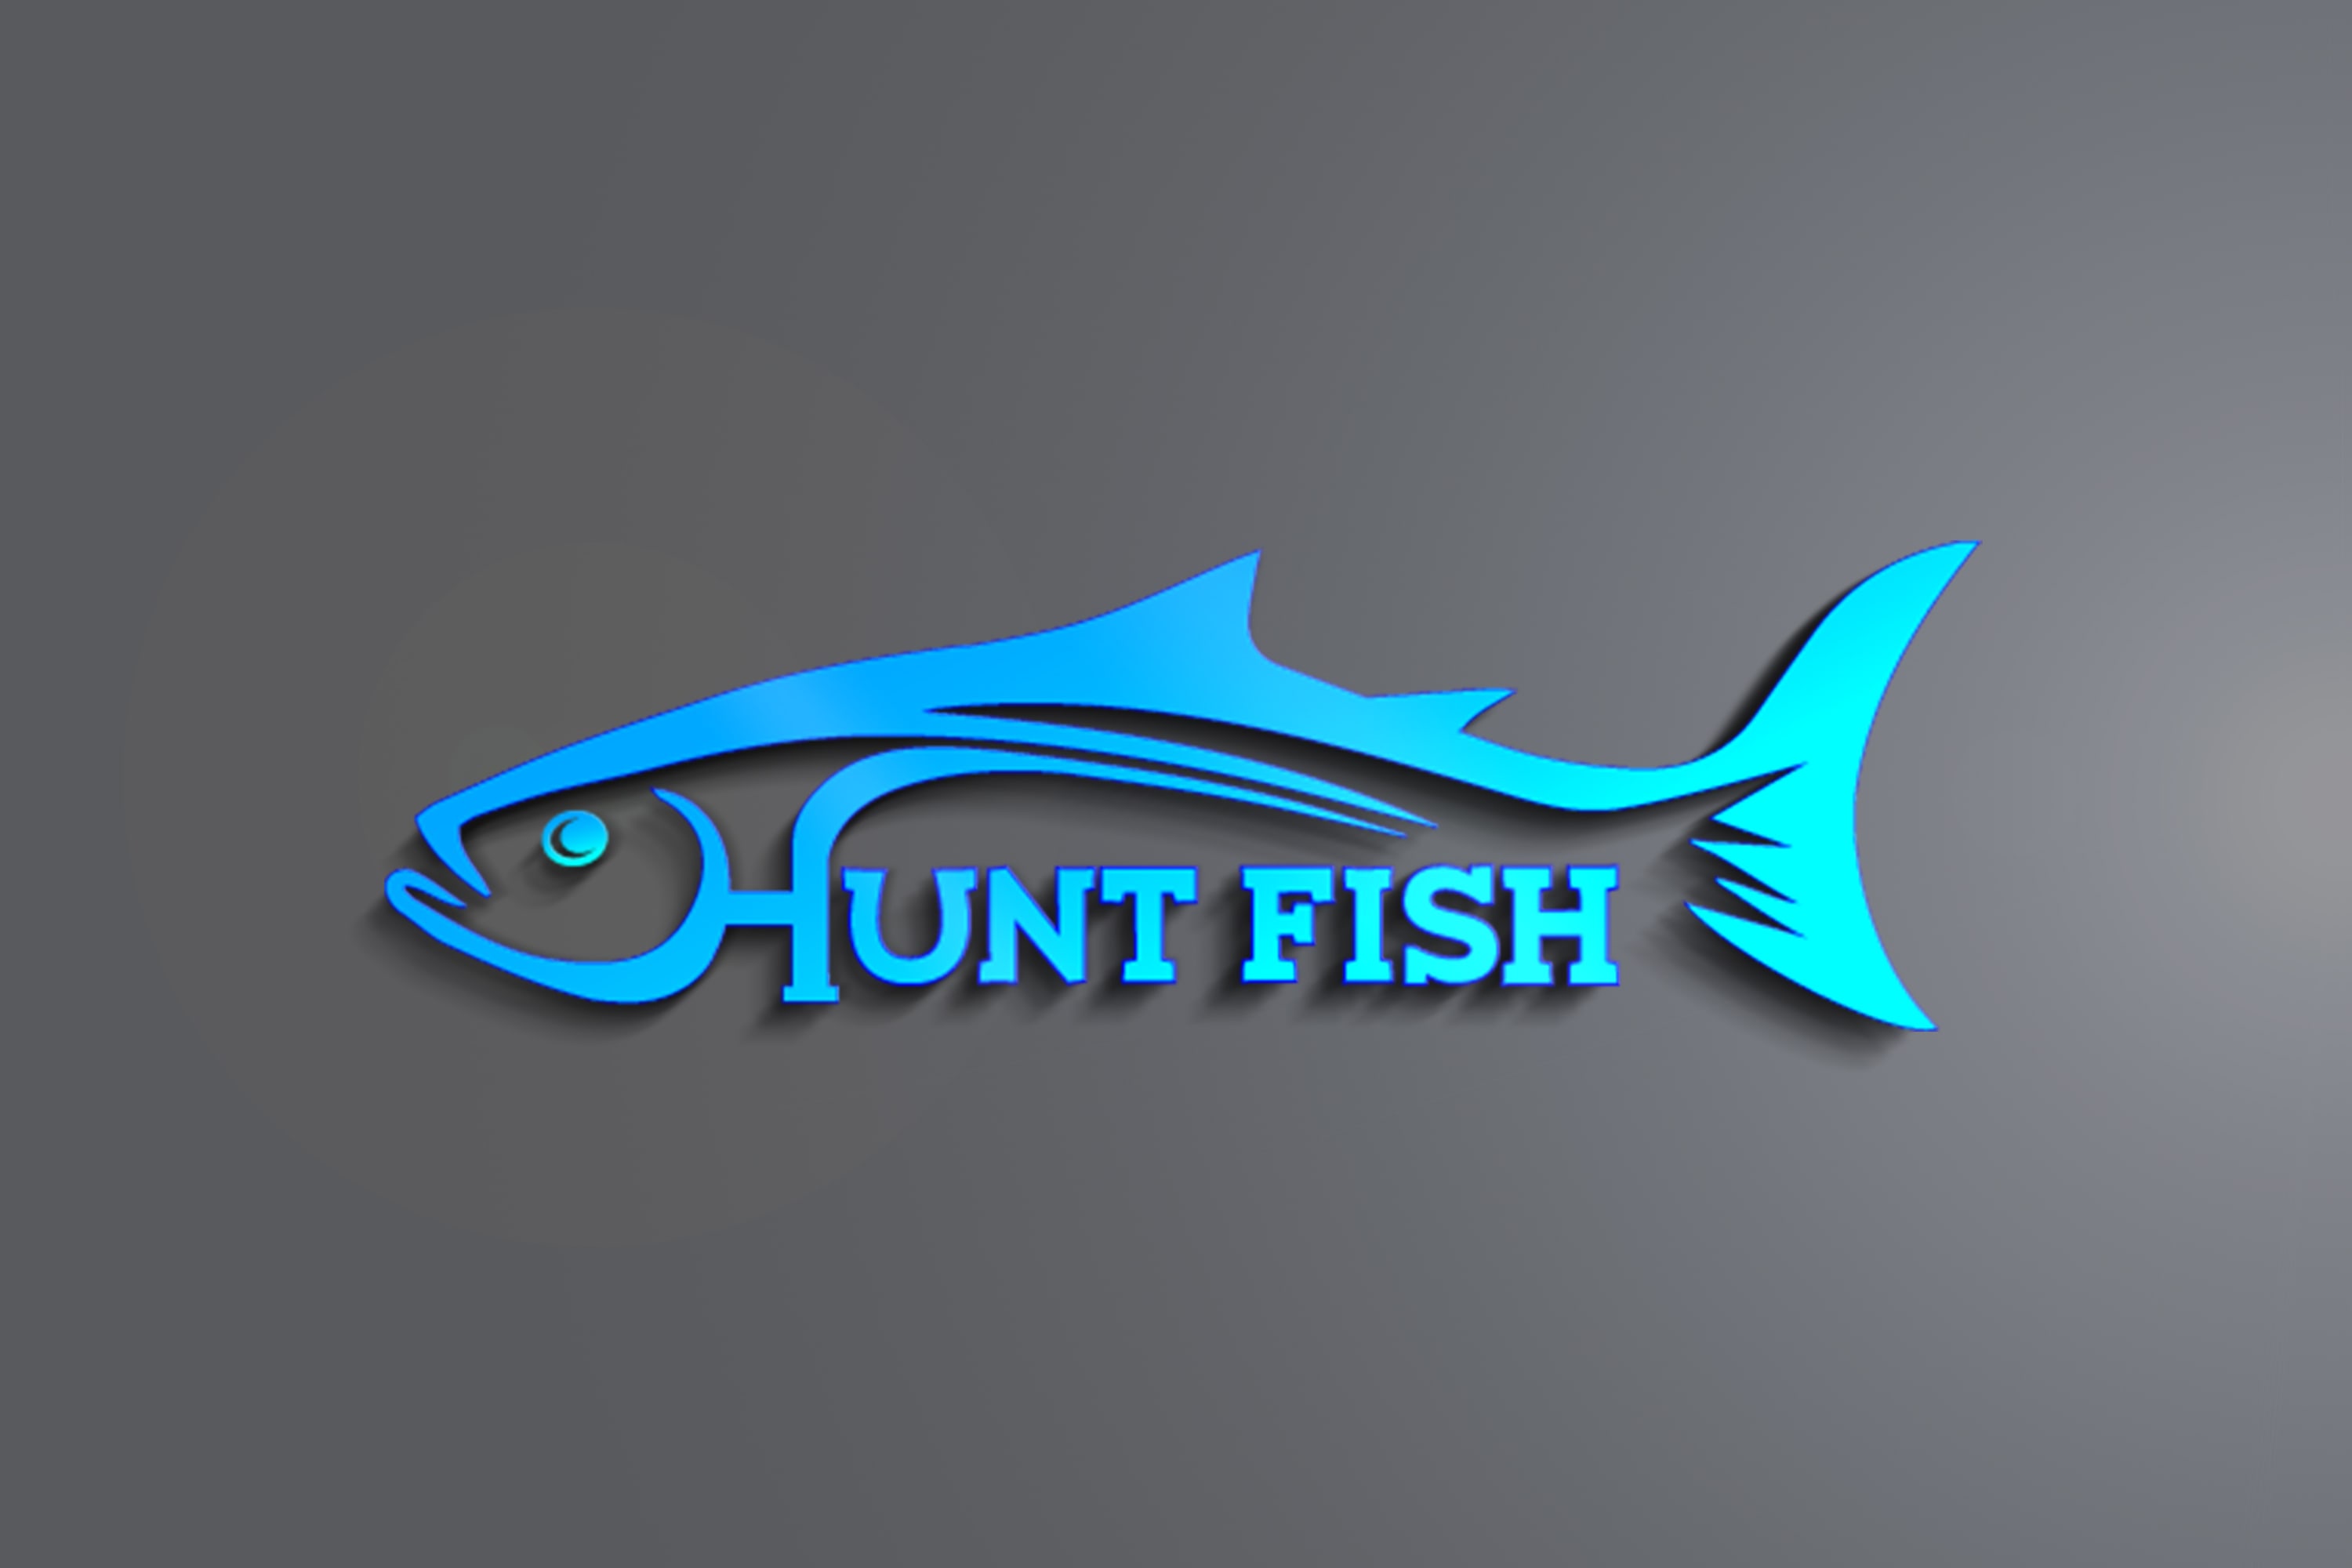 Design fish logo for your fishing business by Masooma_design